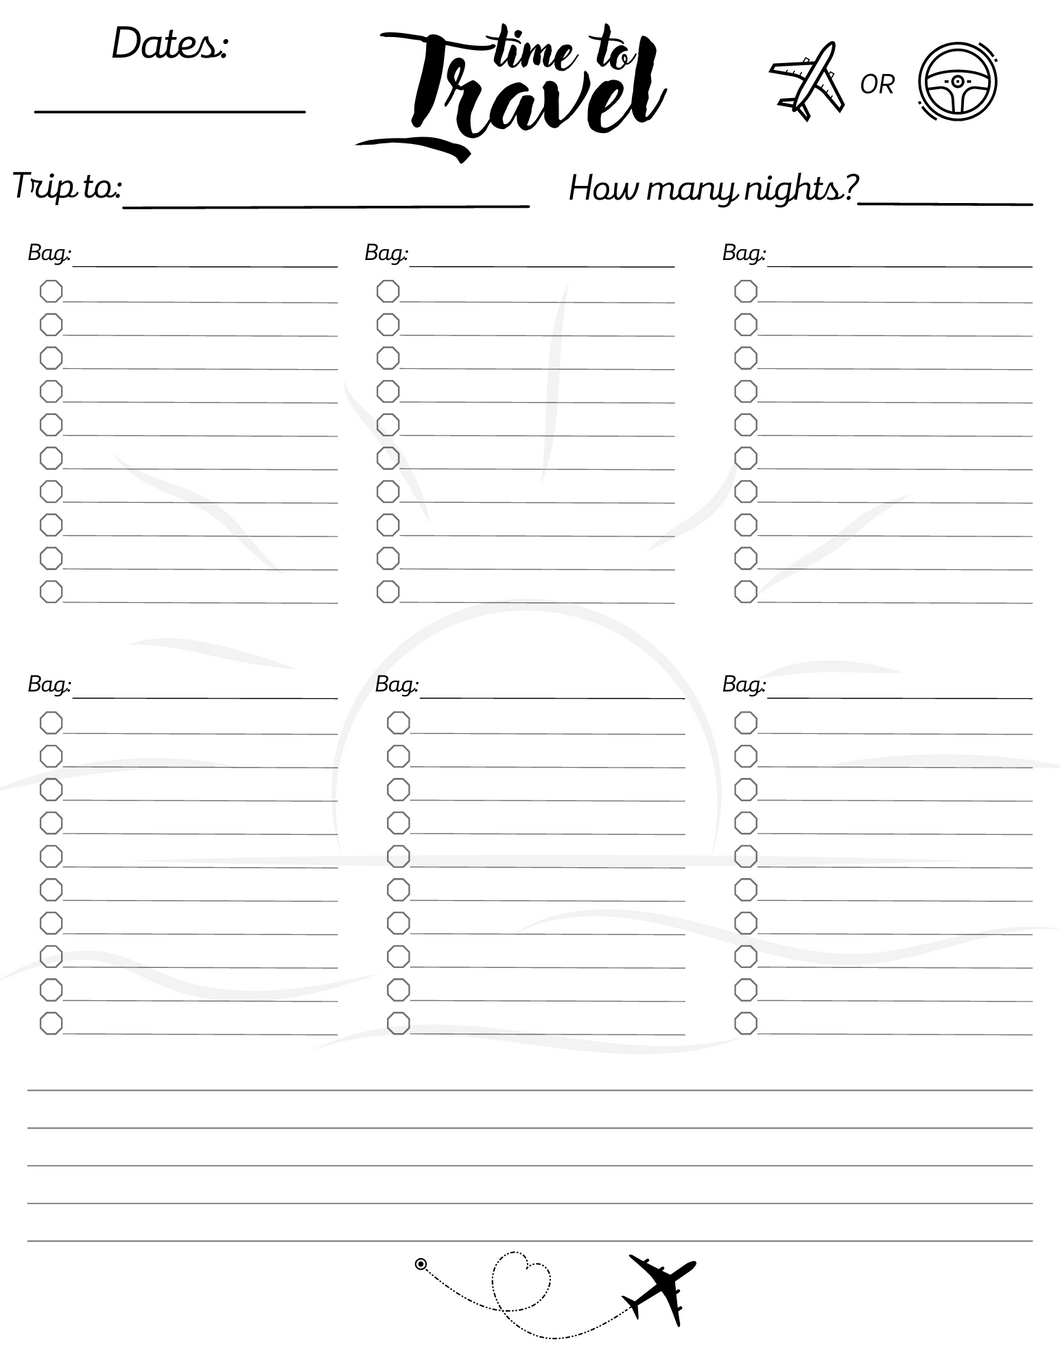 Printable Packing/Travel list with Sun & 6 bag lists - Digital download